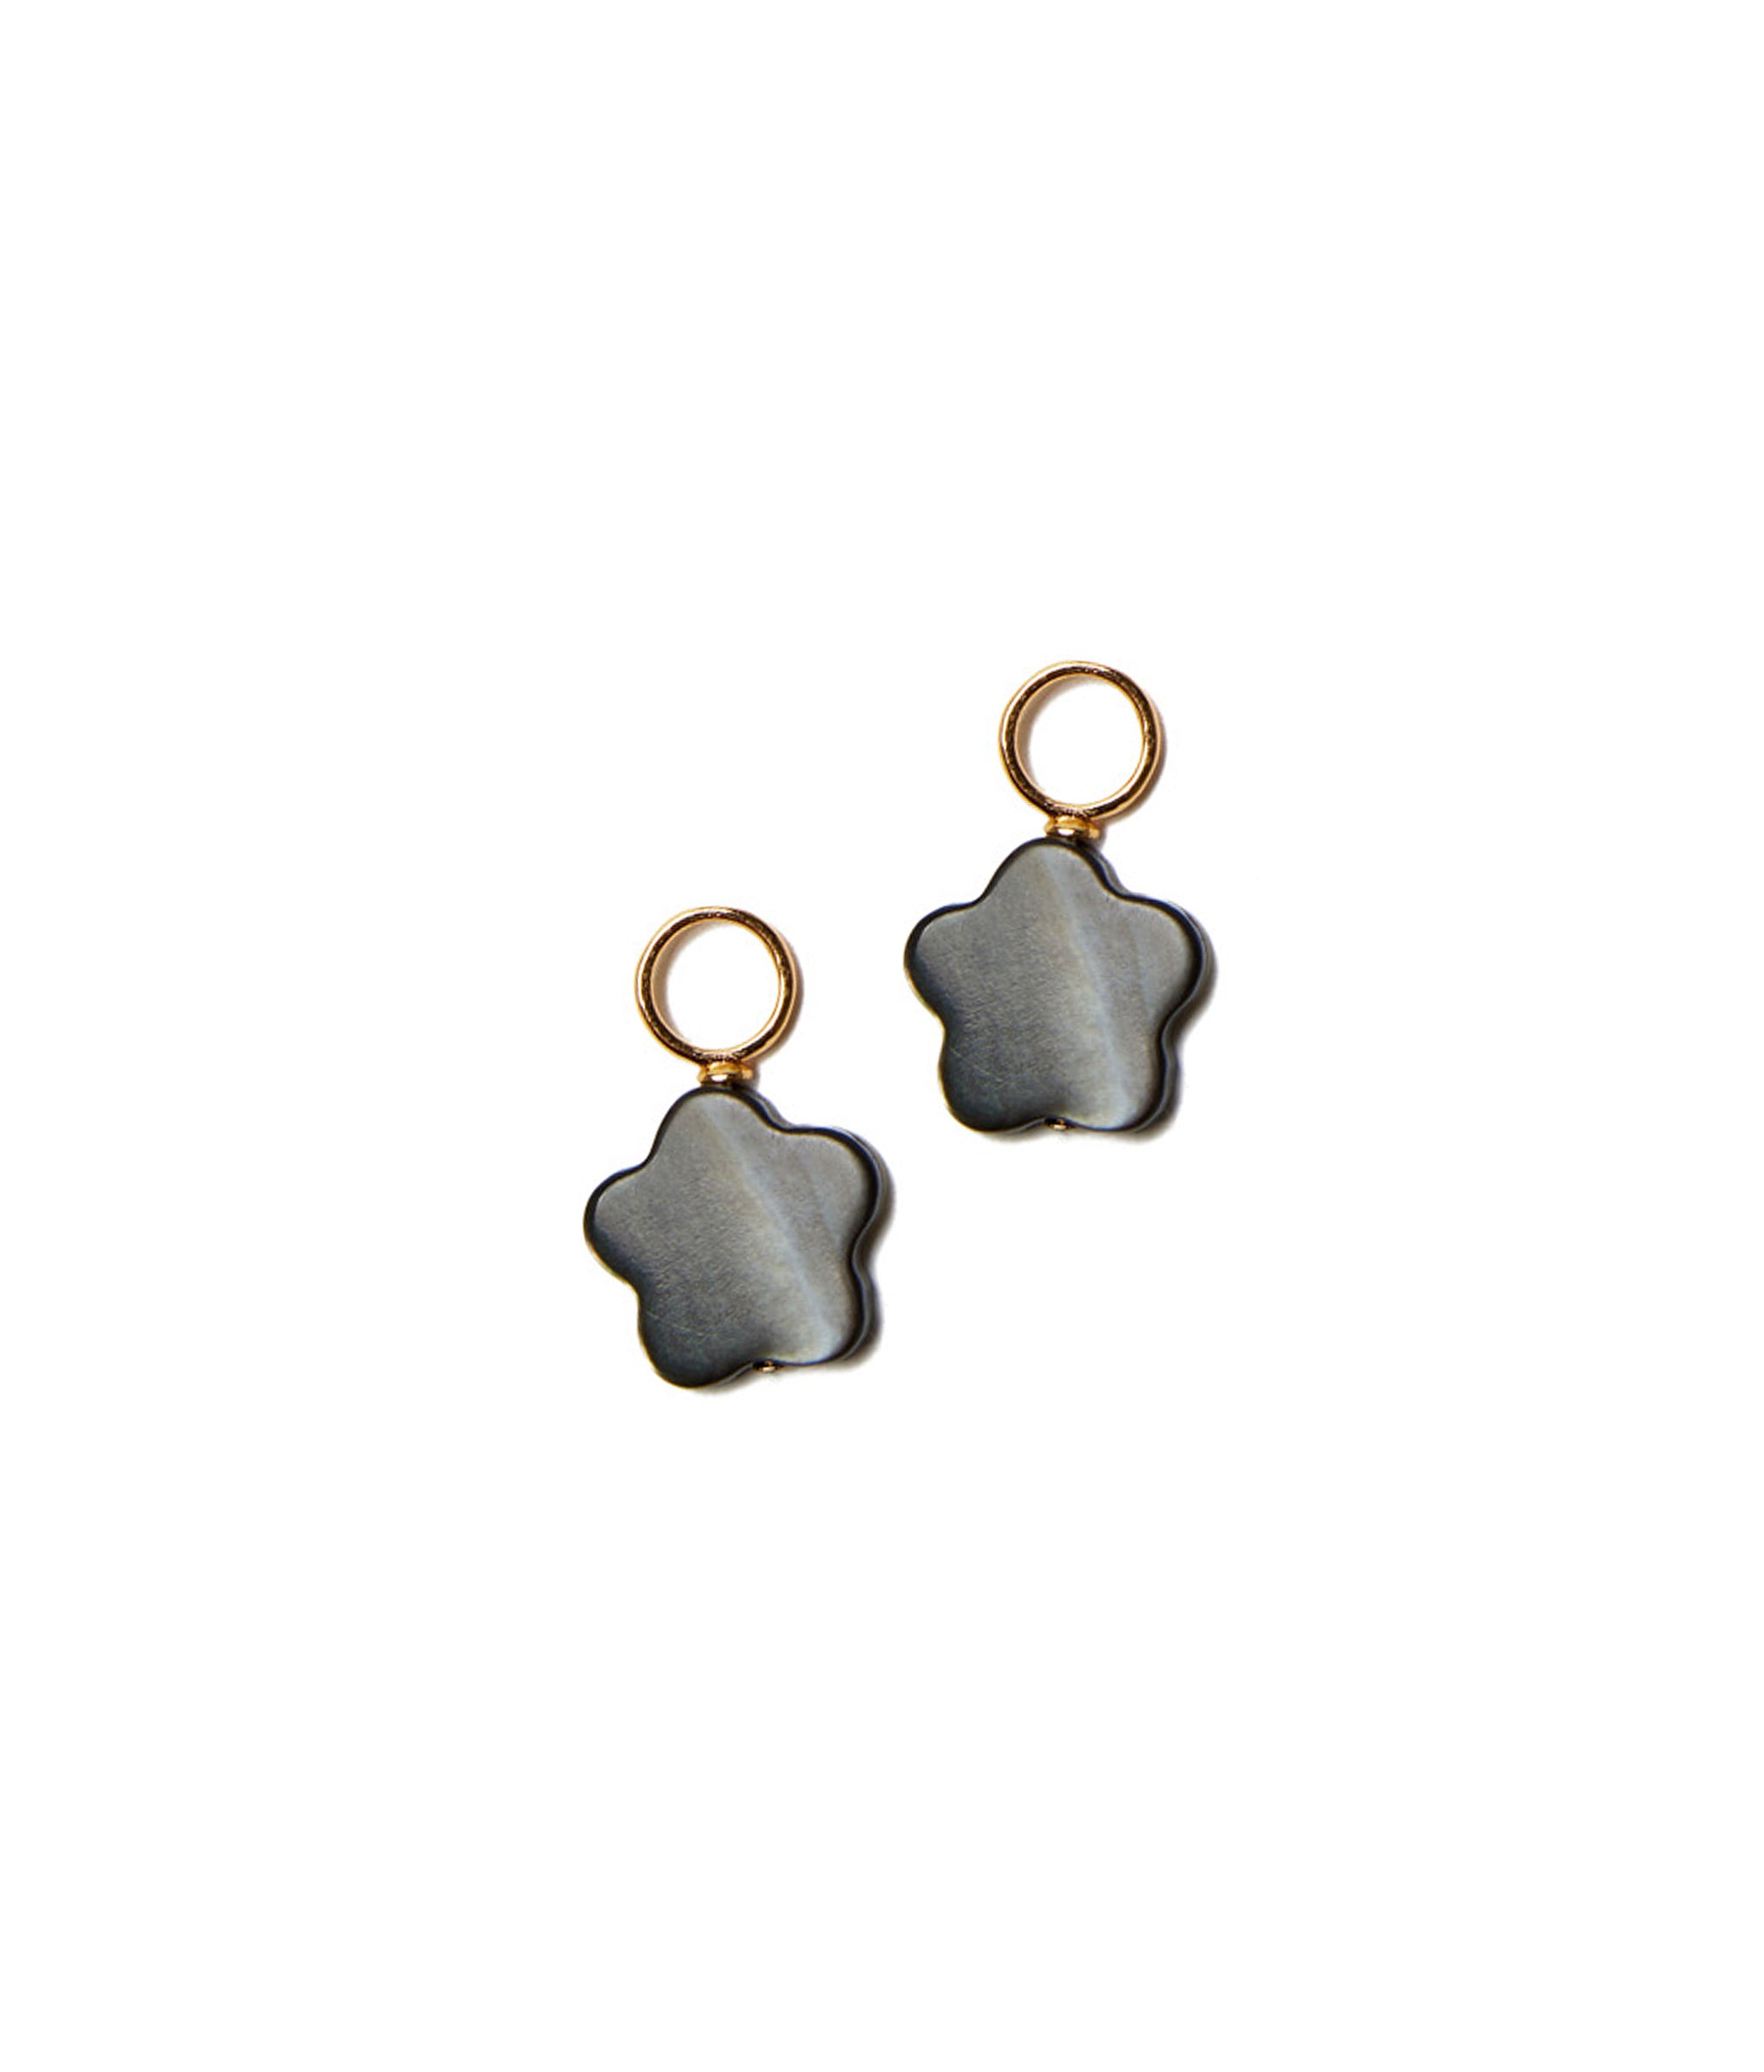 Flower Power Charm. Two charms with gray mother-of-pearl flowers and gold-plated brass ring.